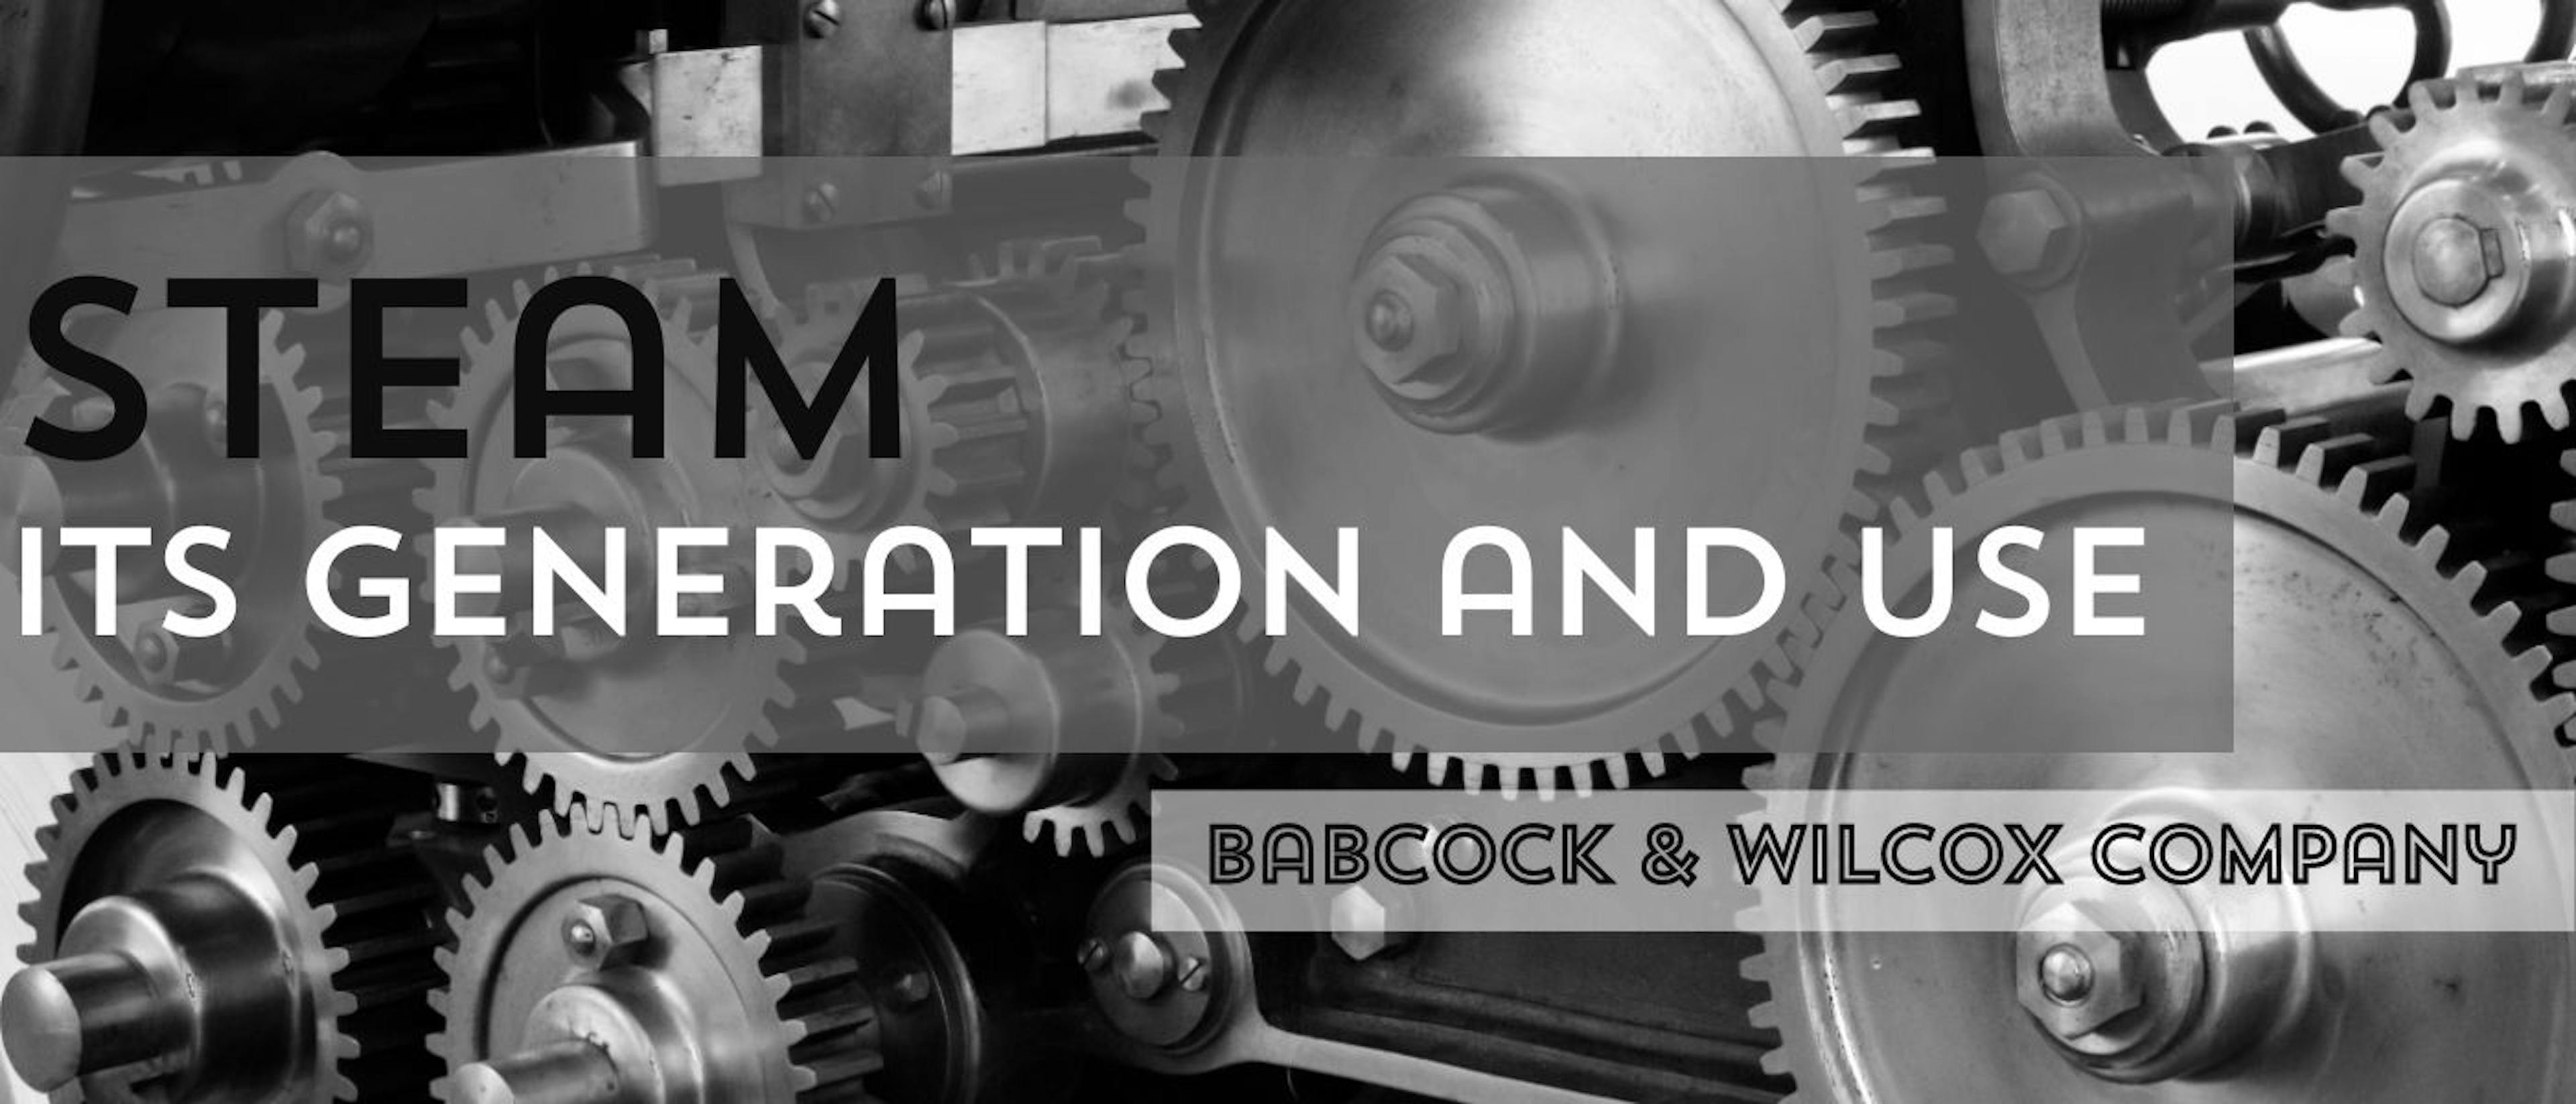 featured image - ADVANTAGES OF THE BABCOCK & WILCOX BOILER